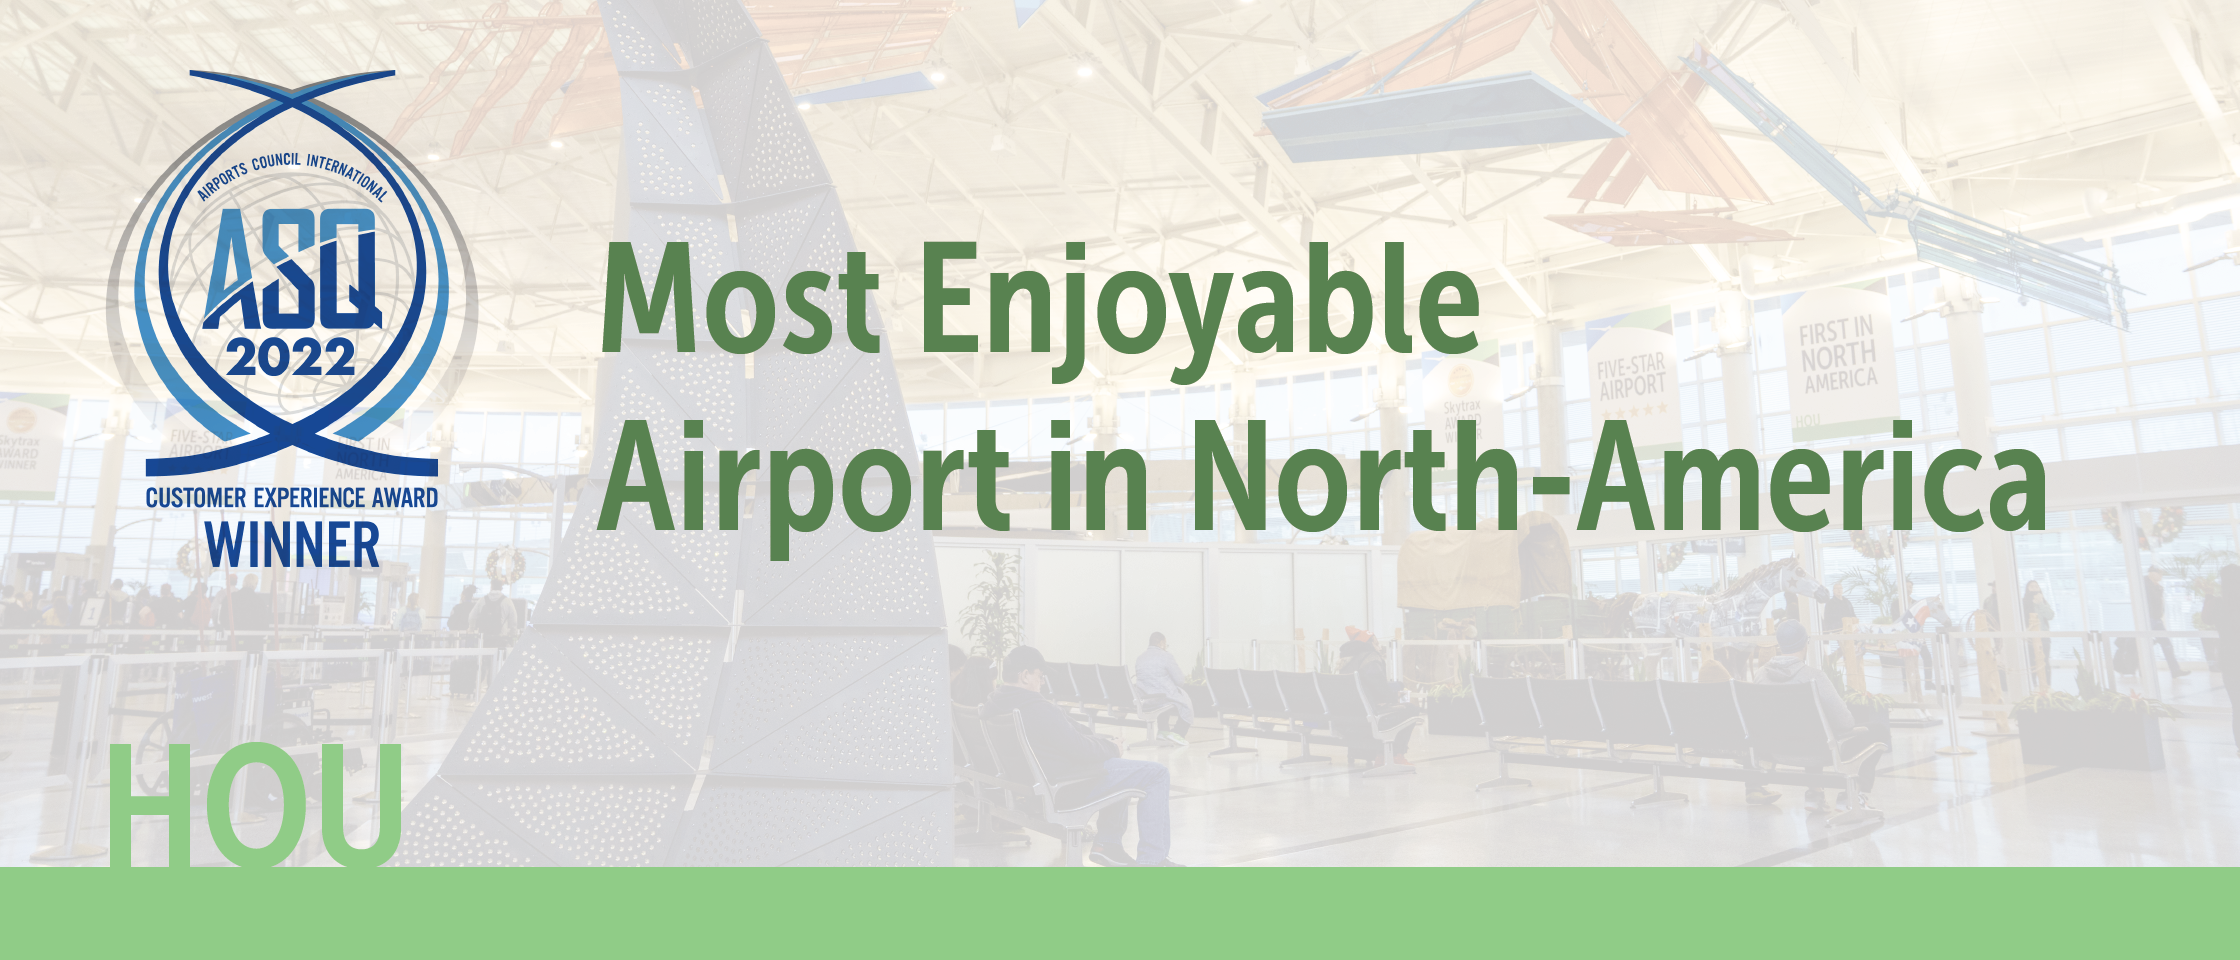 Most Enjoyable Airport in North America